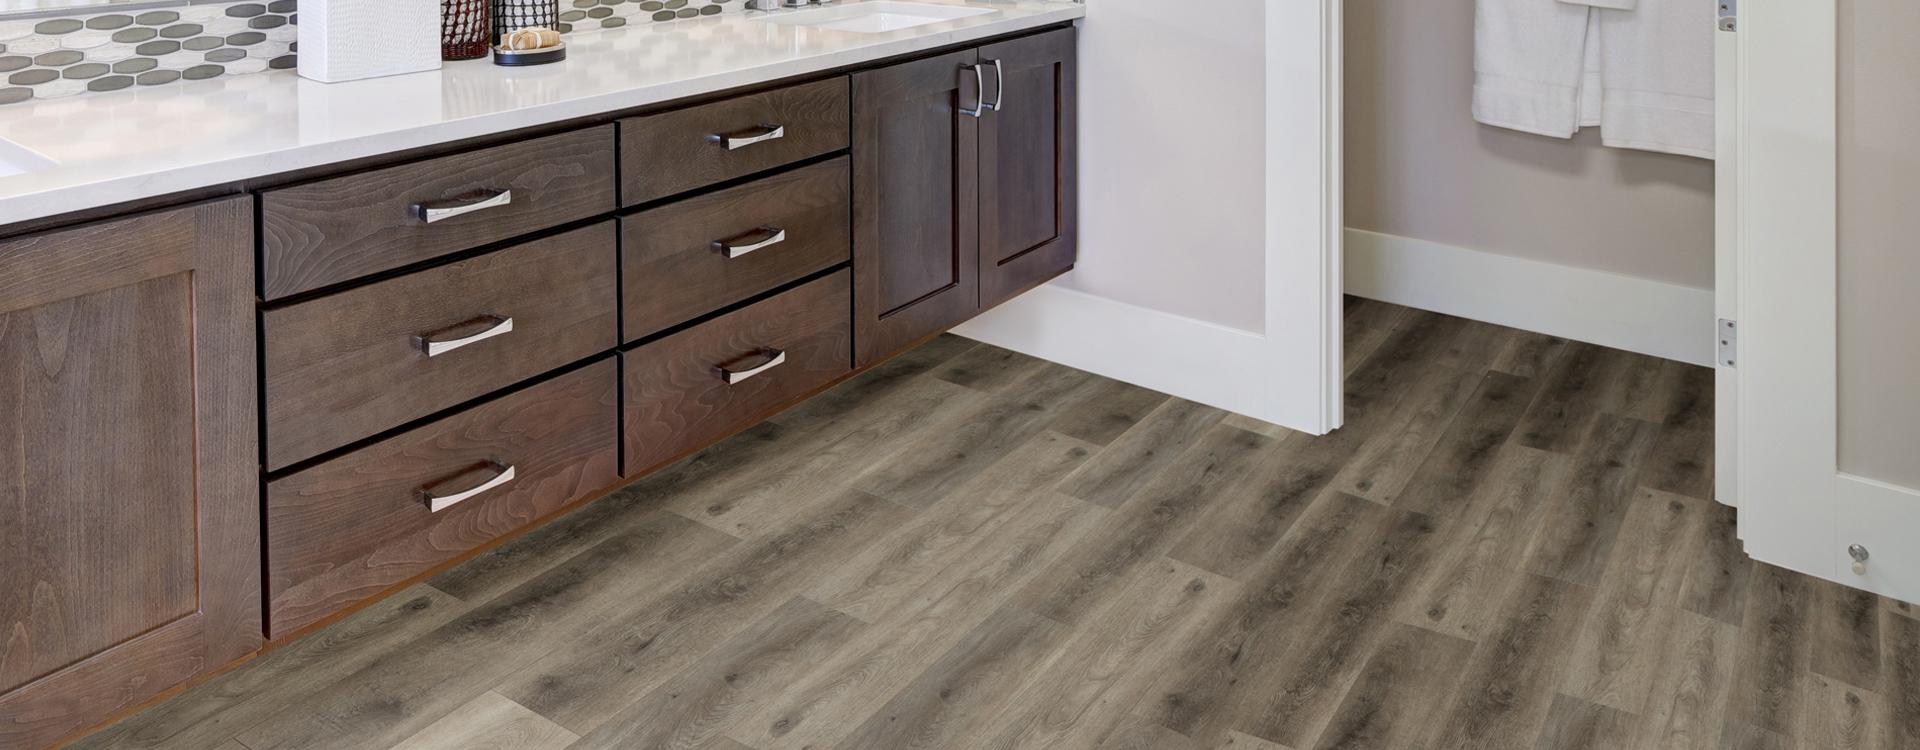 Horizen Flooring presents to you a picture of a quality wide plank Bungalow luxury vinyl plank. NovoCore Premium EIR collection features a wide range of colors & designs that will compliment any interior. Natural wood grain synchronized surface allow for an authentic hardwood look & feel. This collection features a 0.25″ / 6.5 mm overall thickness and a durable 22 mil / 0.55 mm wear layer for residential and commercial applications.